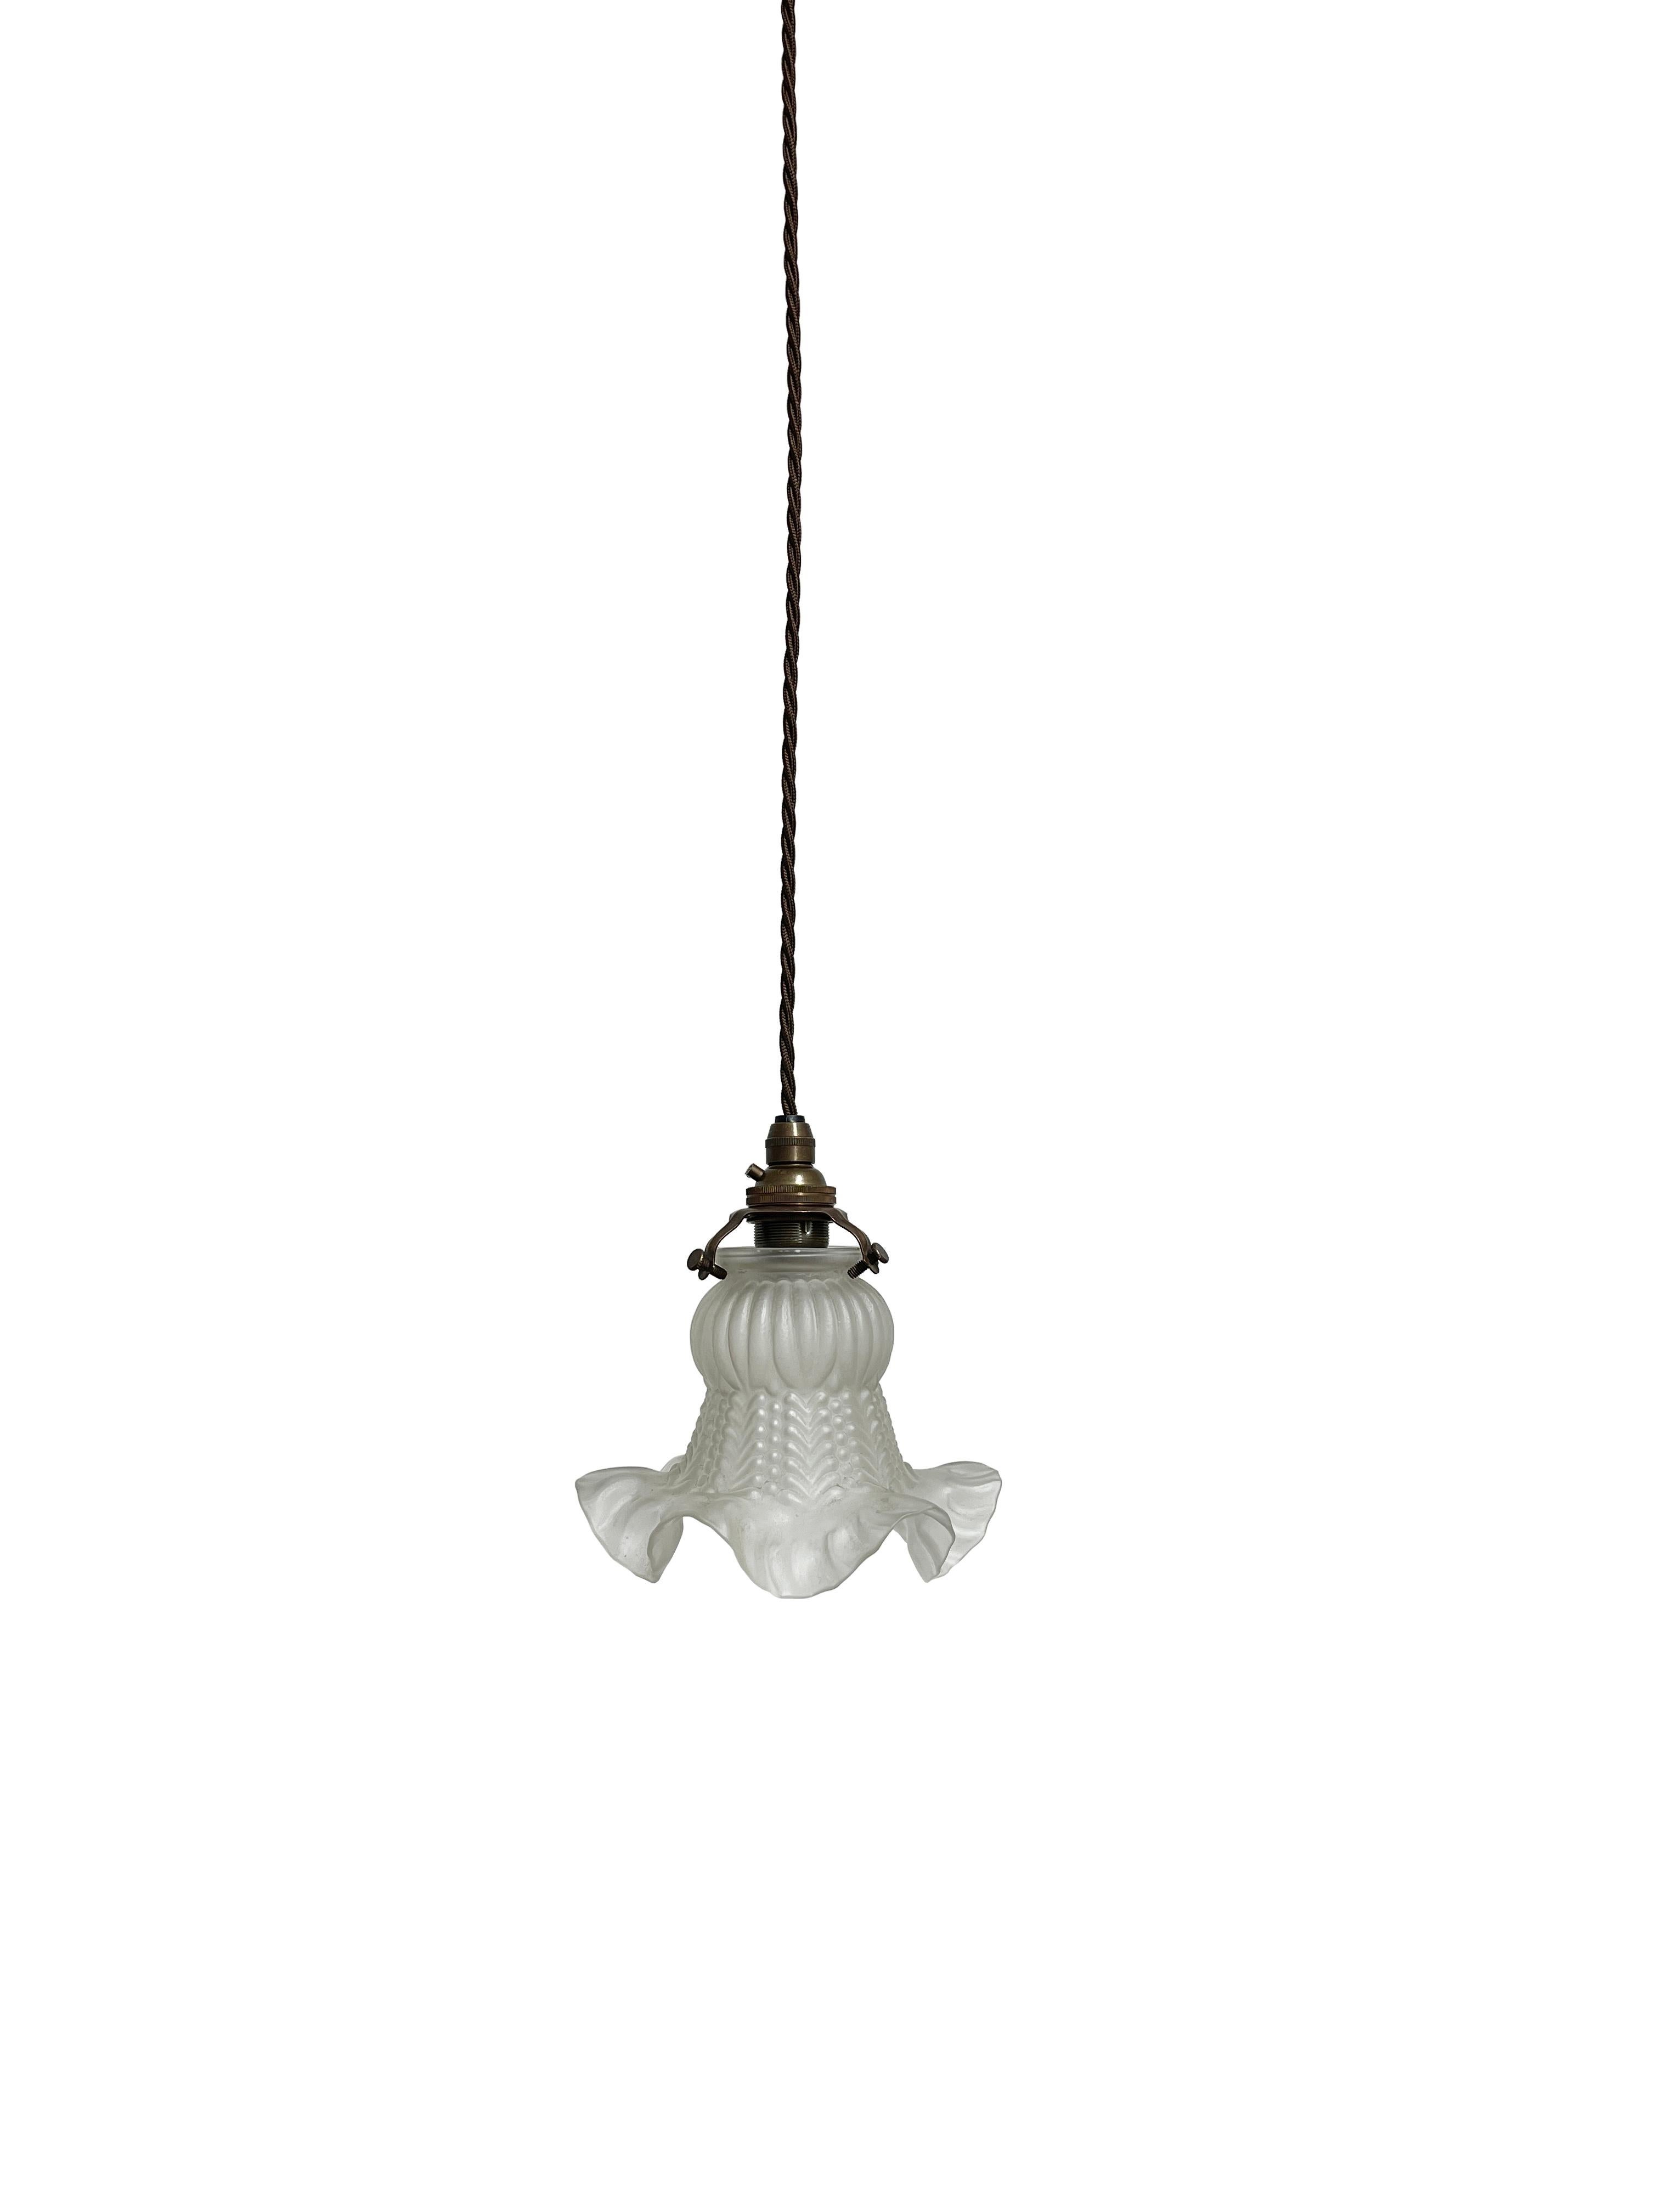 - A fabulous pair of frilly pendant light shades, French circa 1930.
- Frosted glass 'tulipe' shades both with brass holders and original decorative ceiling roses.
- Ideal as swag pendants or suspended bedside lighting, in beautiful vintage